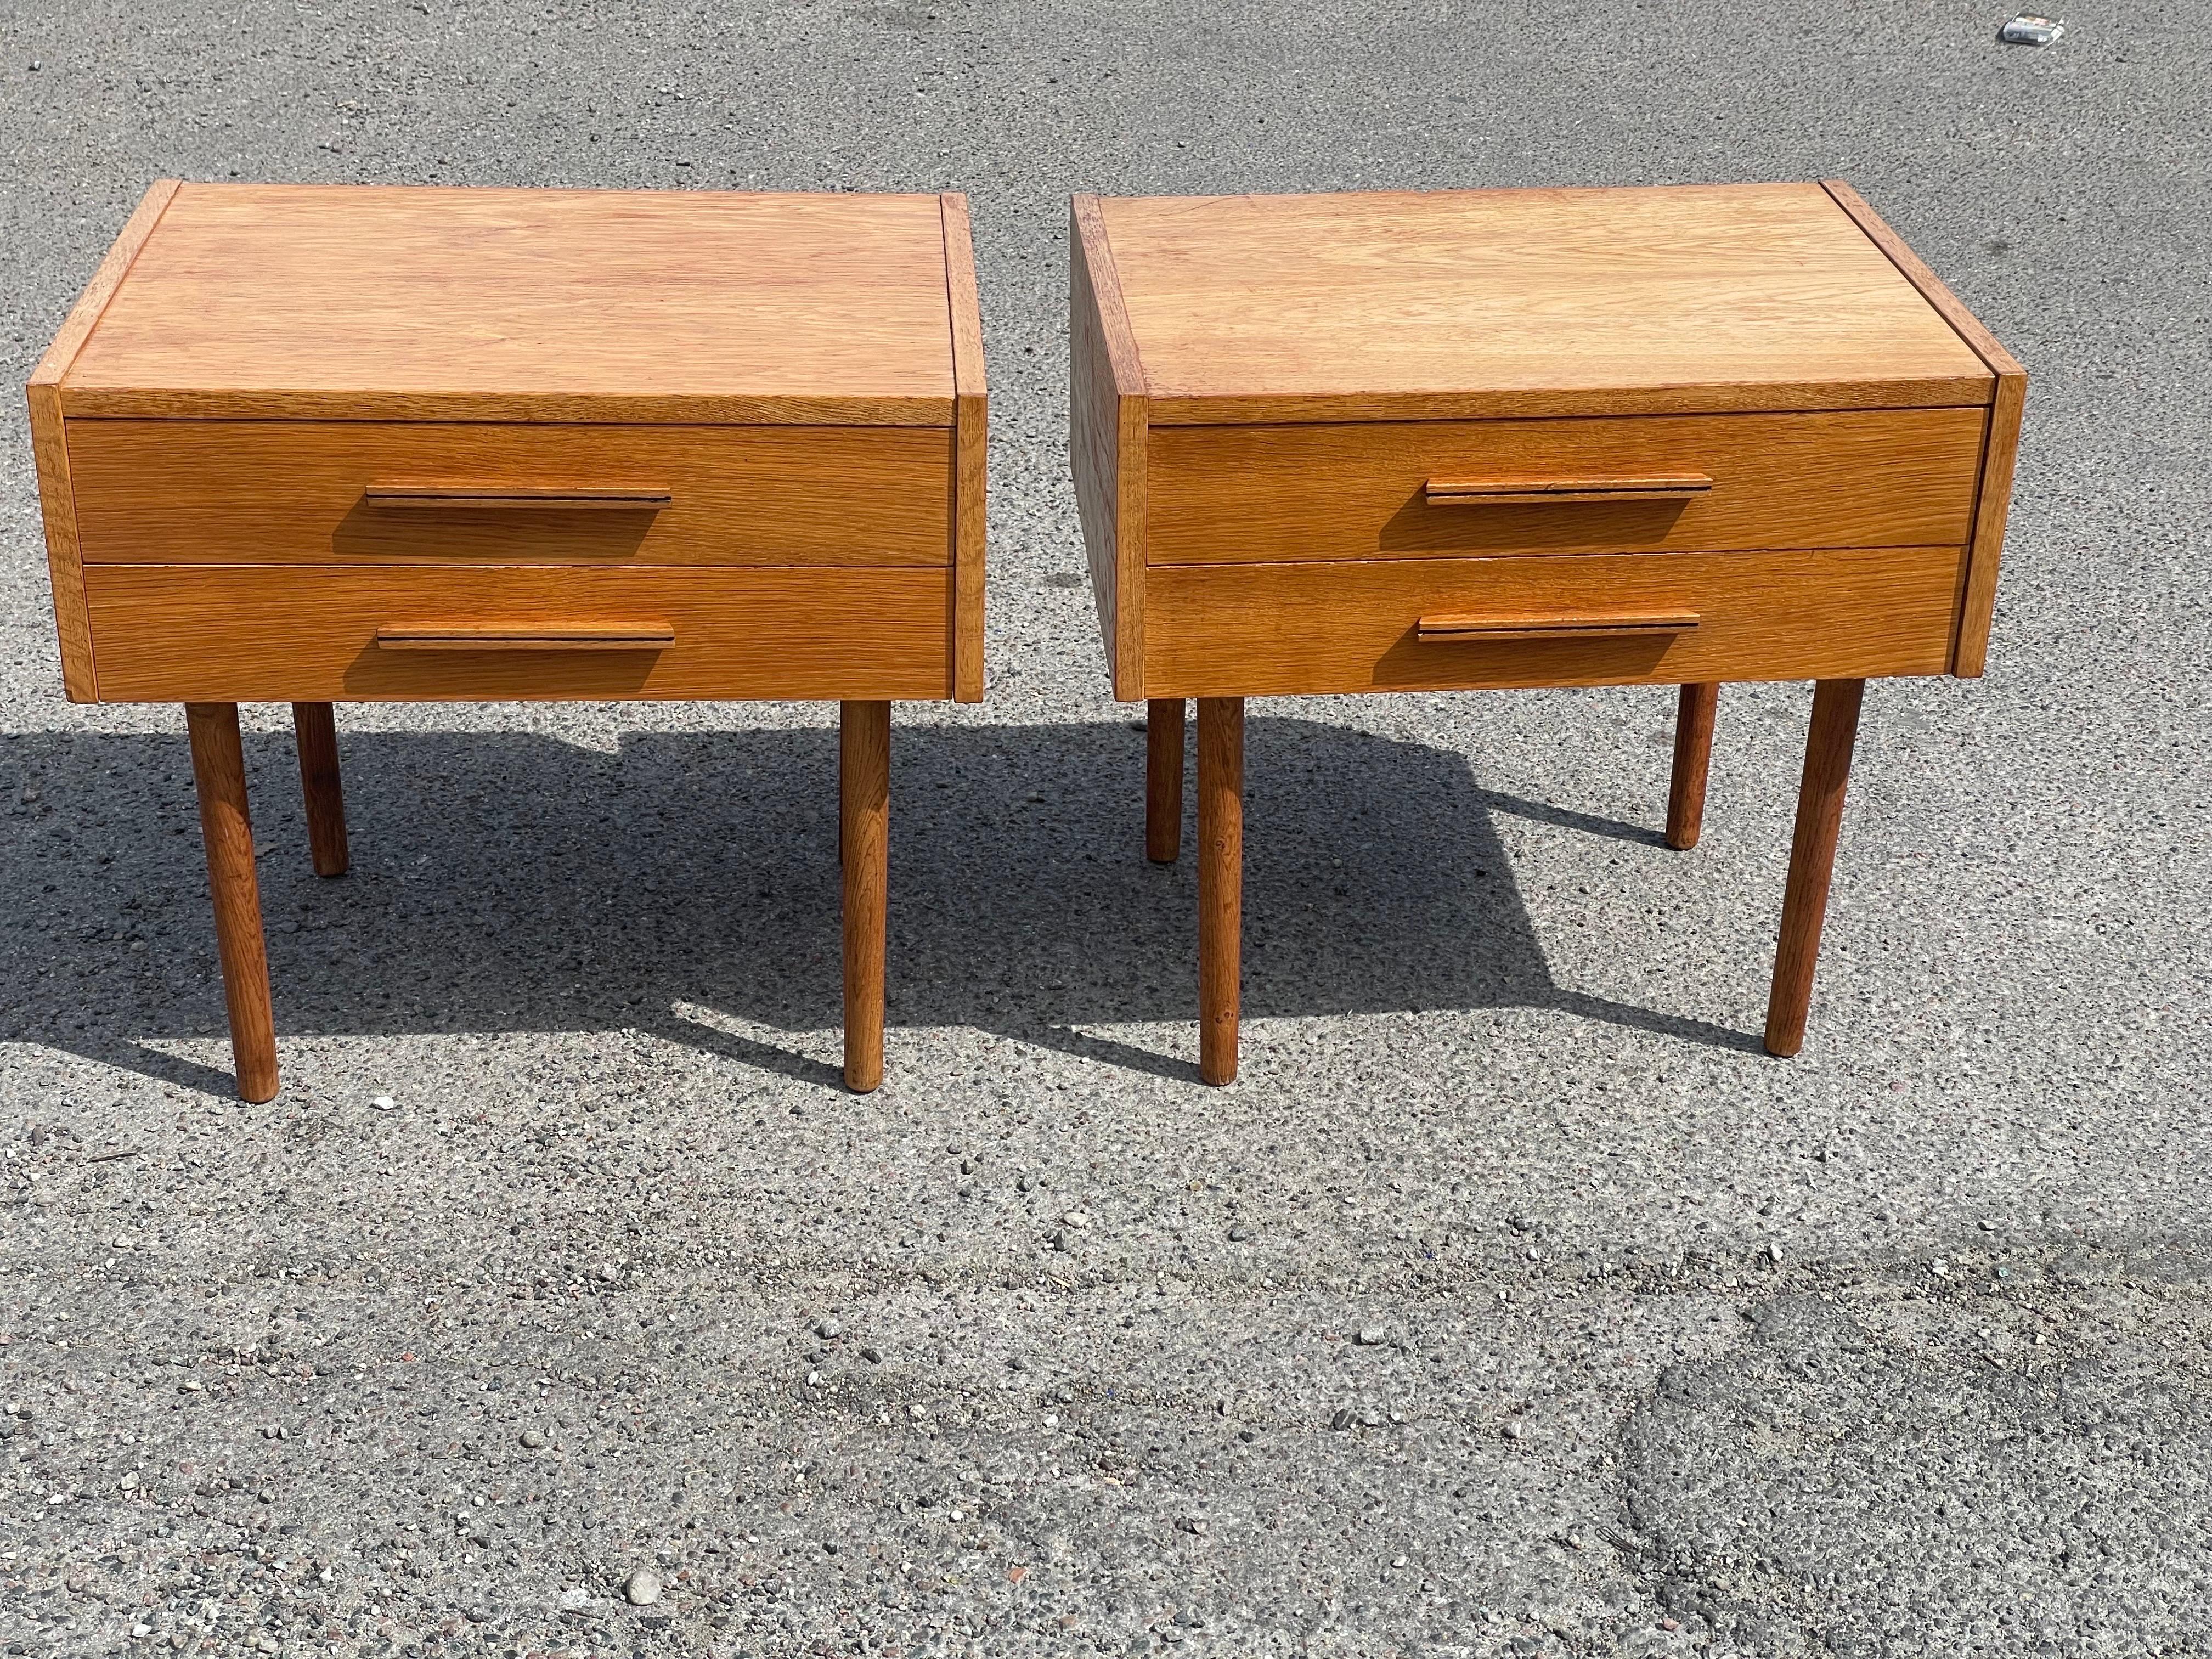 The perfect blend of style and functionality with these two spacious Danish Mid-Century Modern nightstands. Crafted in oak, these nightstands feature a sleek design with clean lines. Each nightstand comes with two drawers, providing ample storage